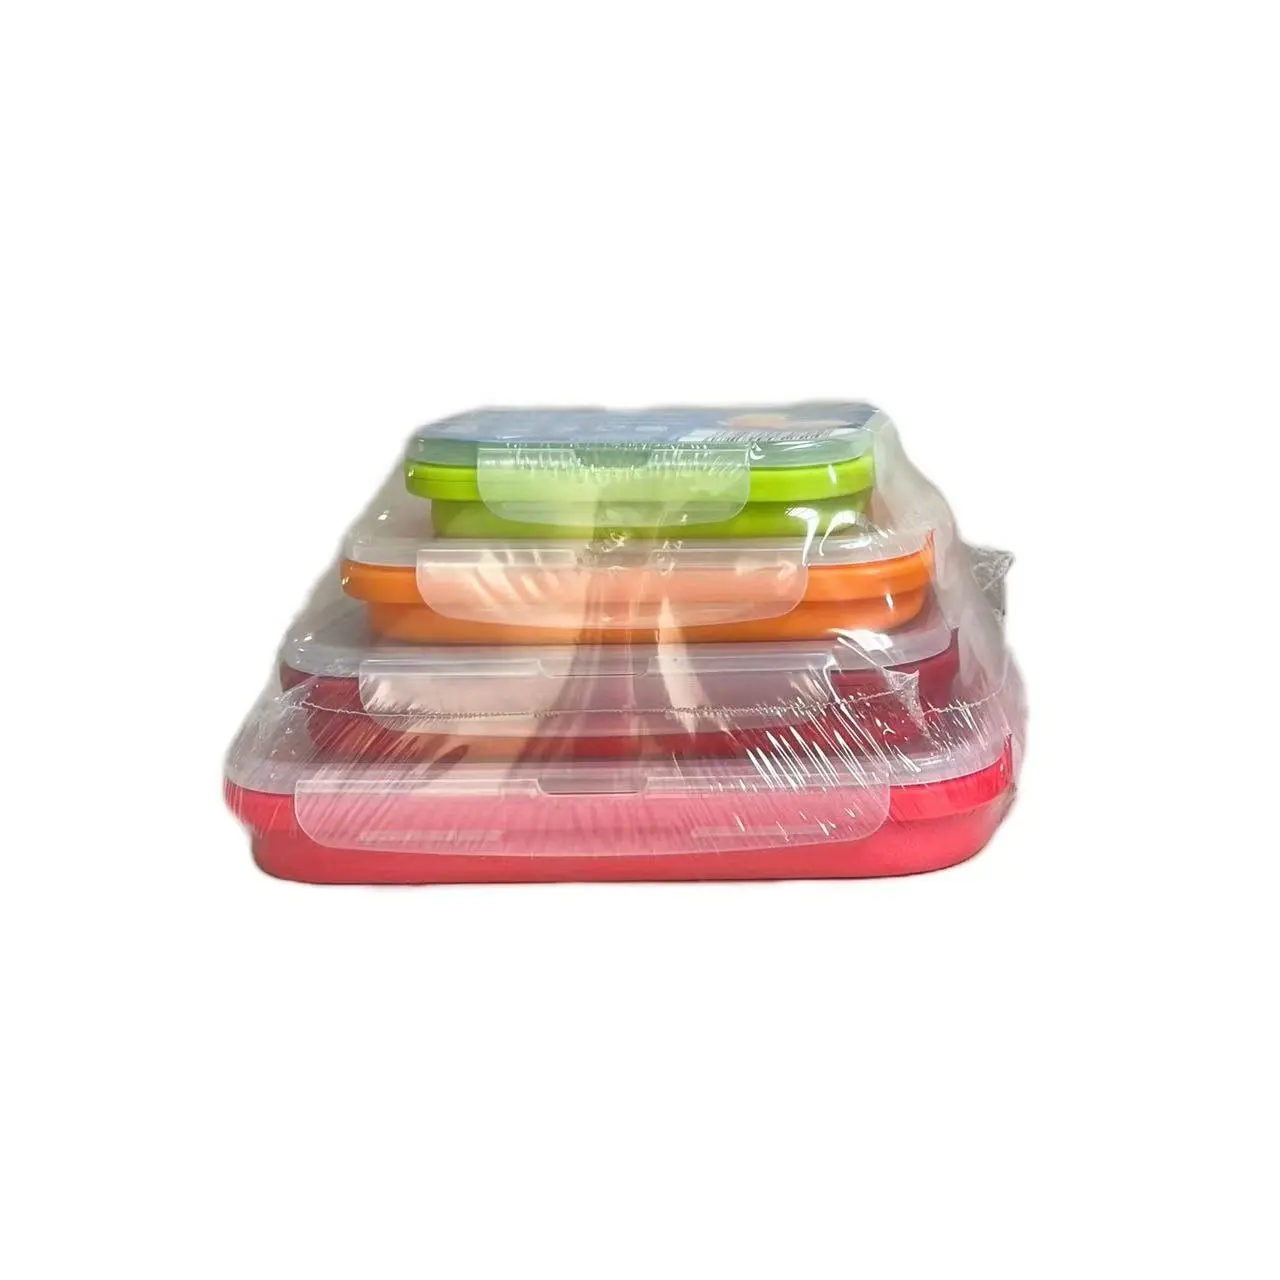 4PCS Silicone Collapsible Bento Folding Food Storage Container Leakproof Lunch Box Portable Outdoor Picnic